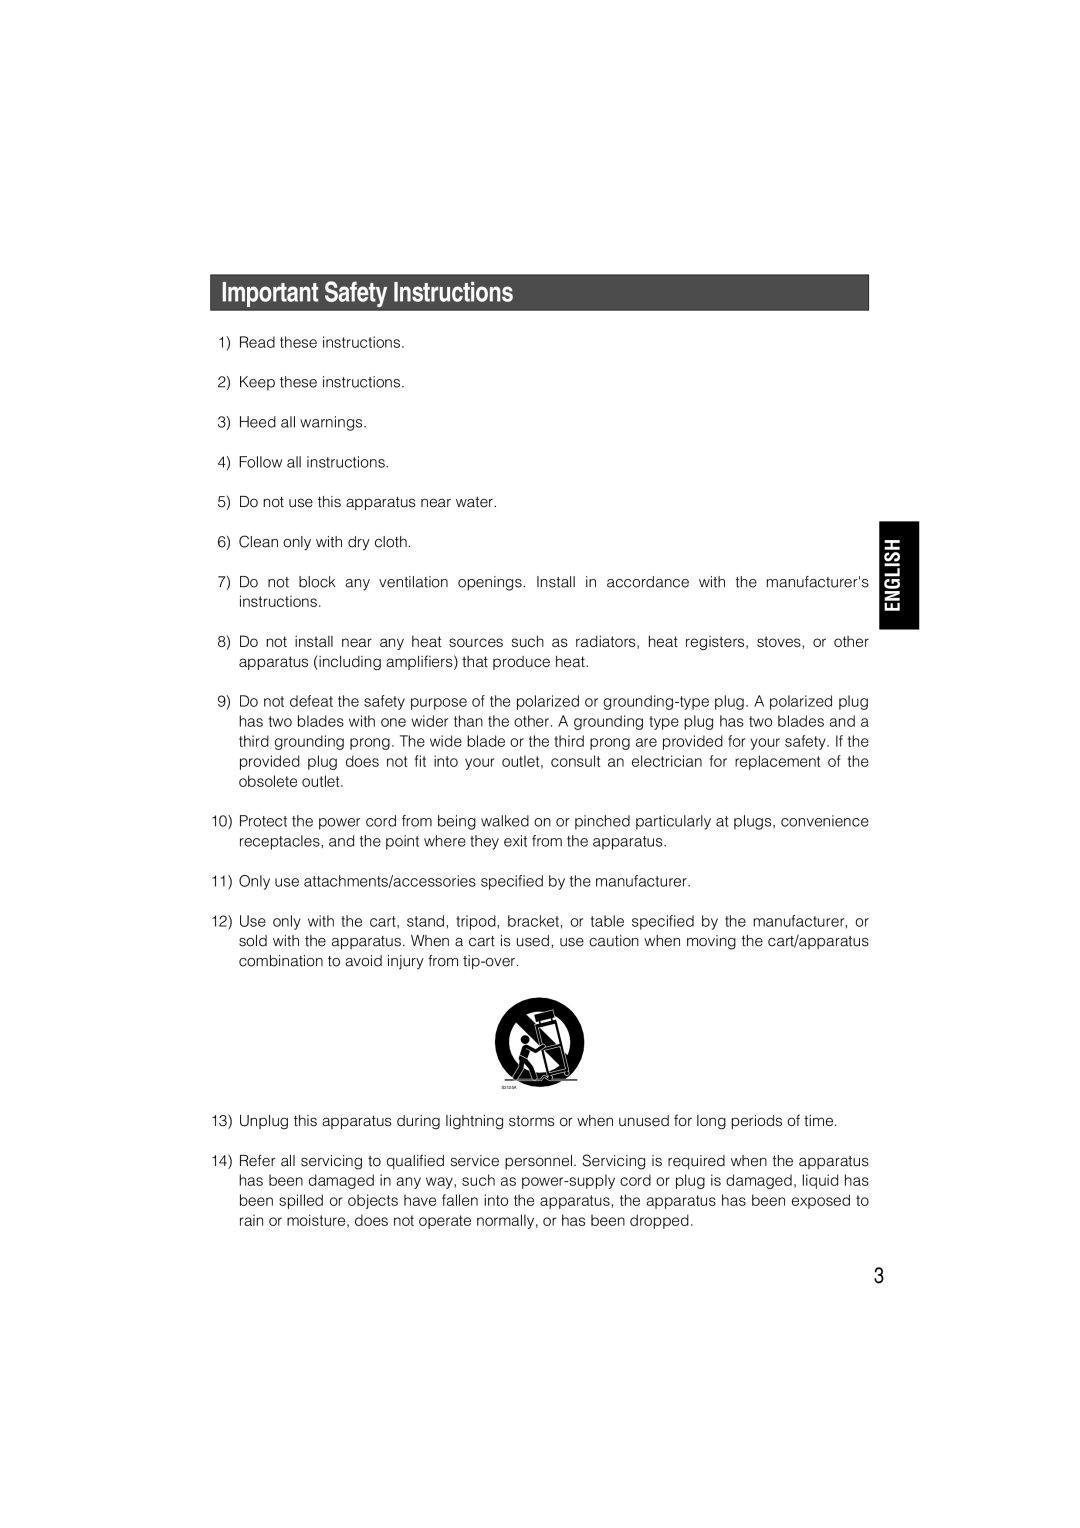 Panasonic WV-CP280, WV-CP284 operating instructions Important Safety Instructions, English 